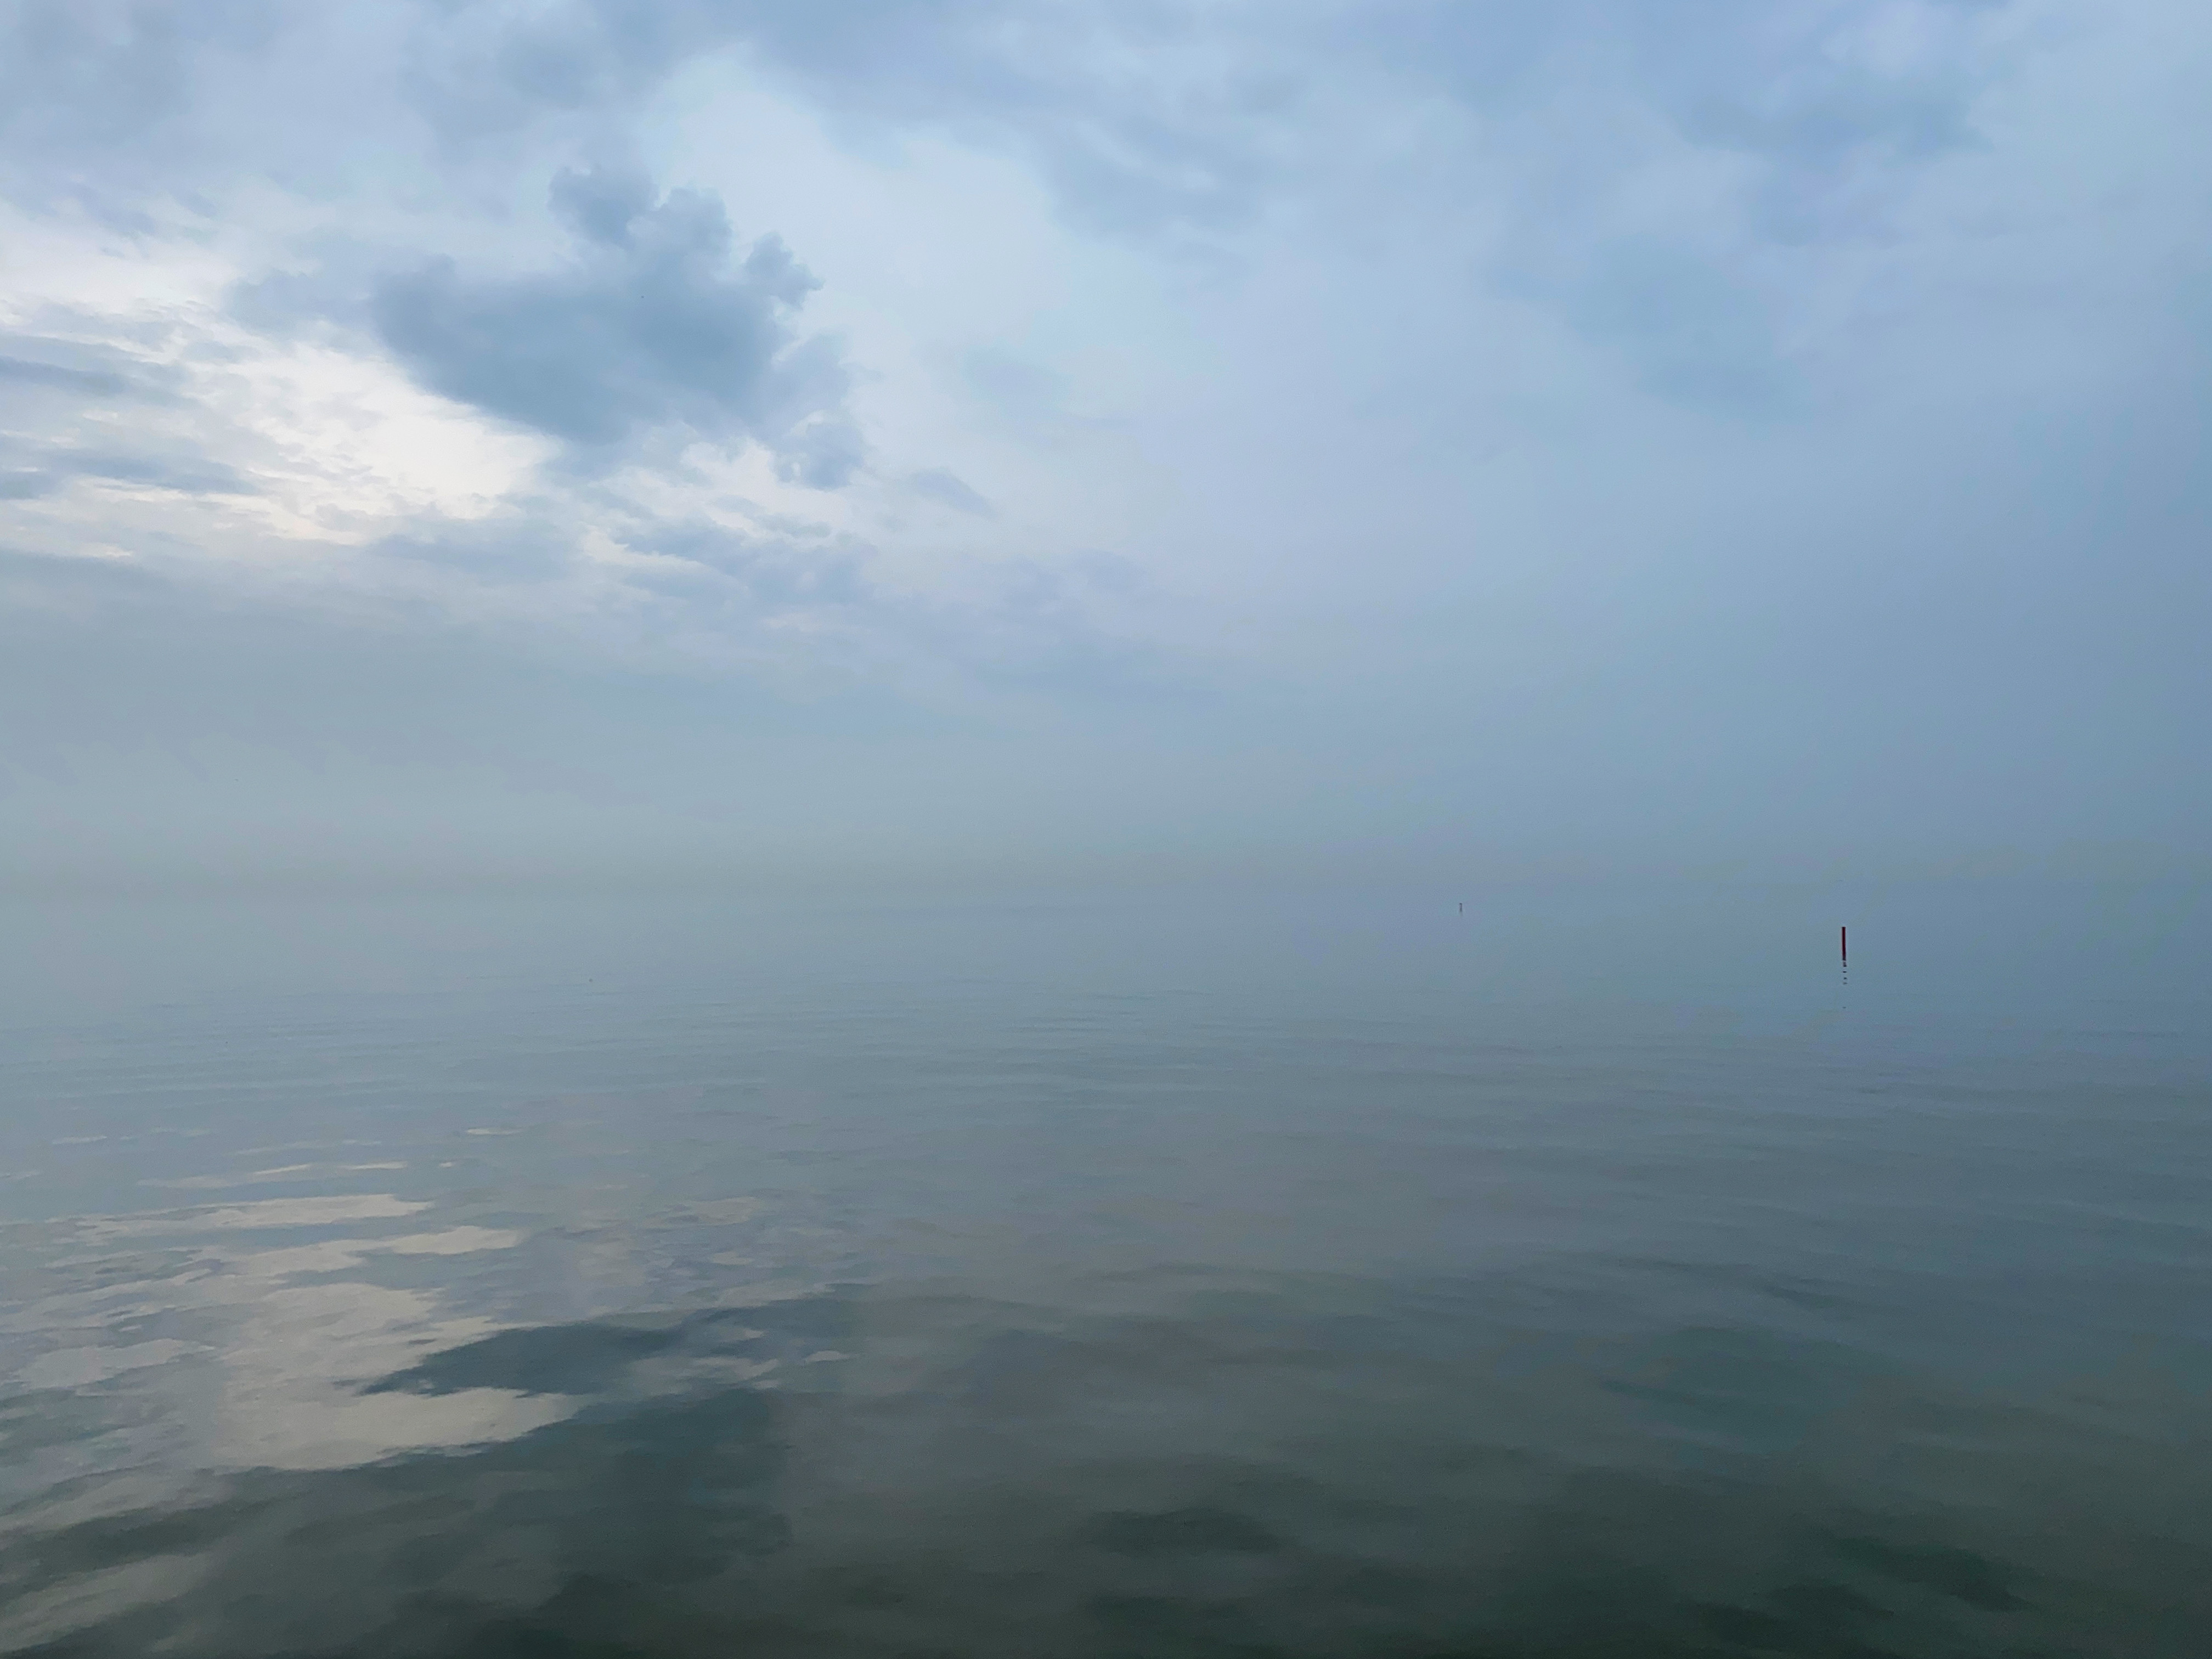 Hazy and cloudy pale blue sky above a glassy lake surface